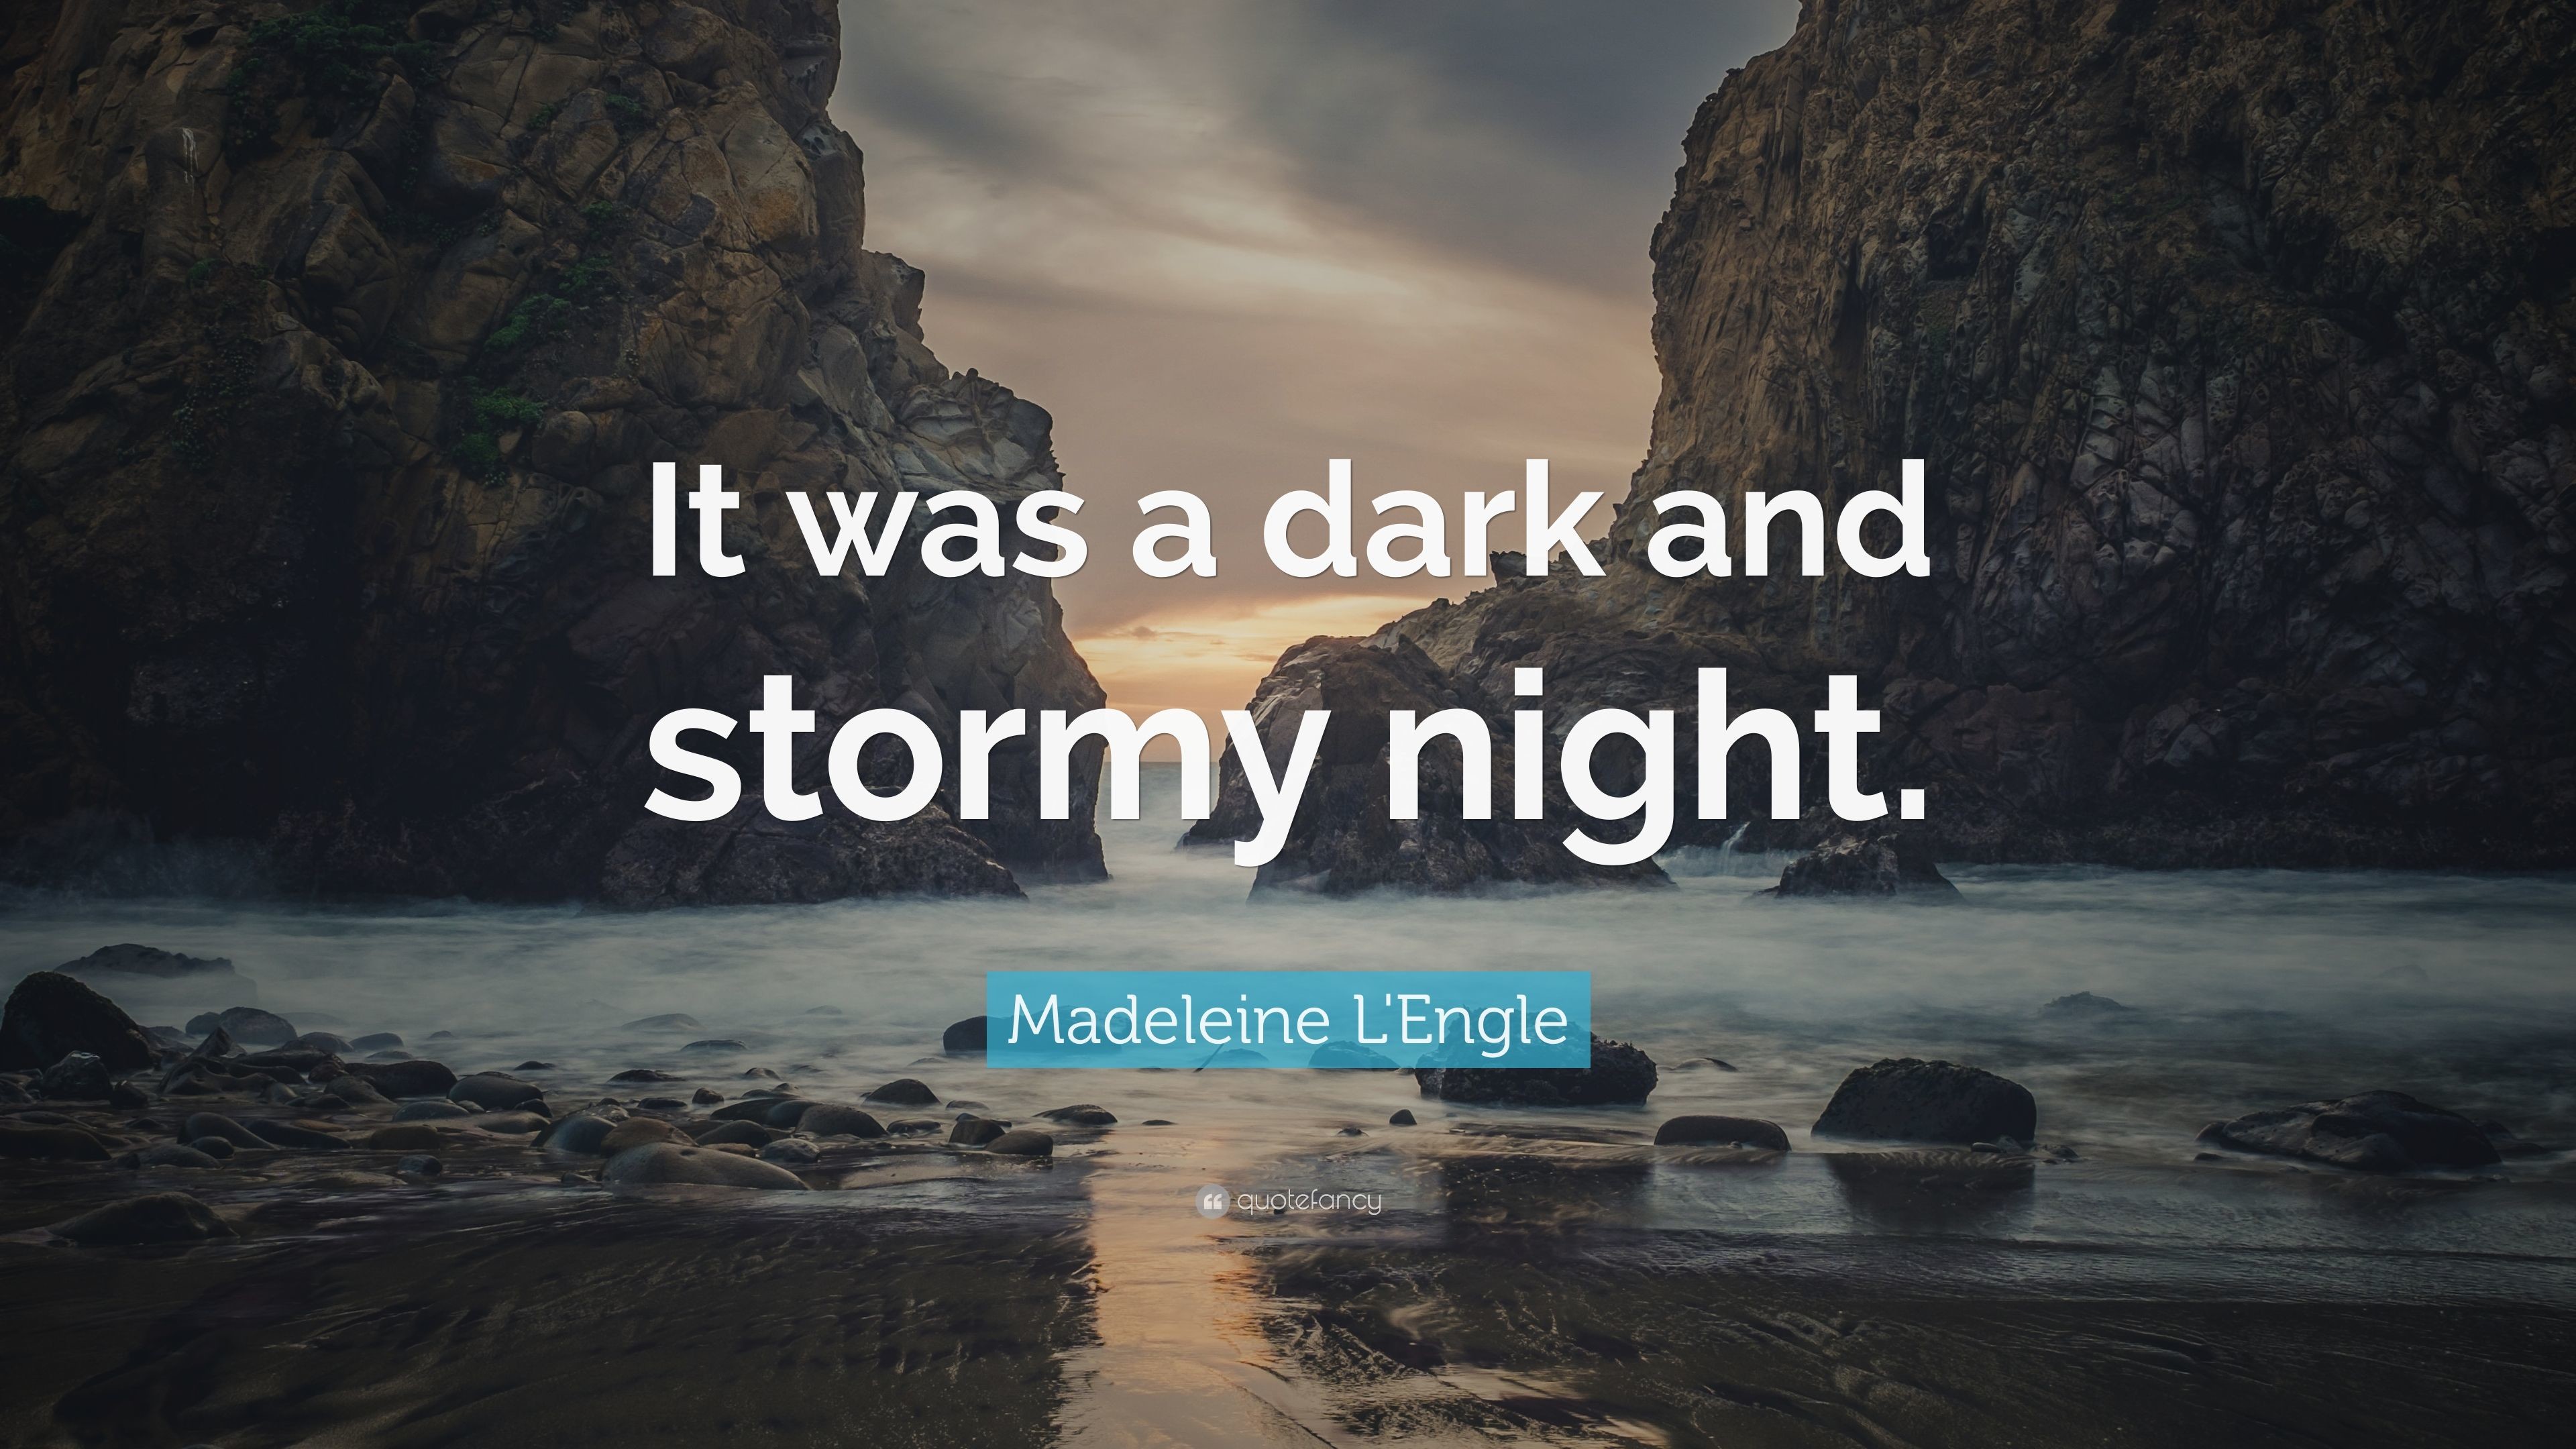 3840x2160 Madeleine L'Engle Quote: “It was a dark and stormy night.”